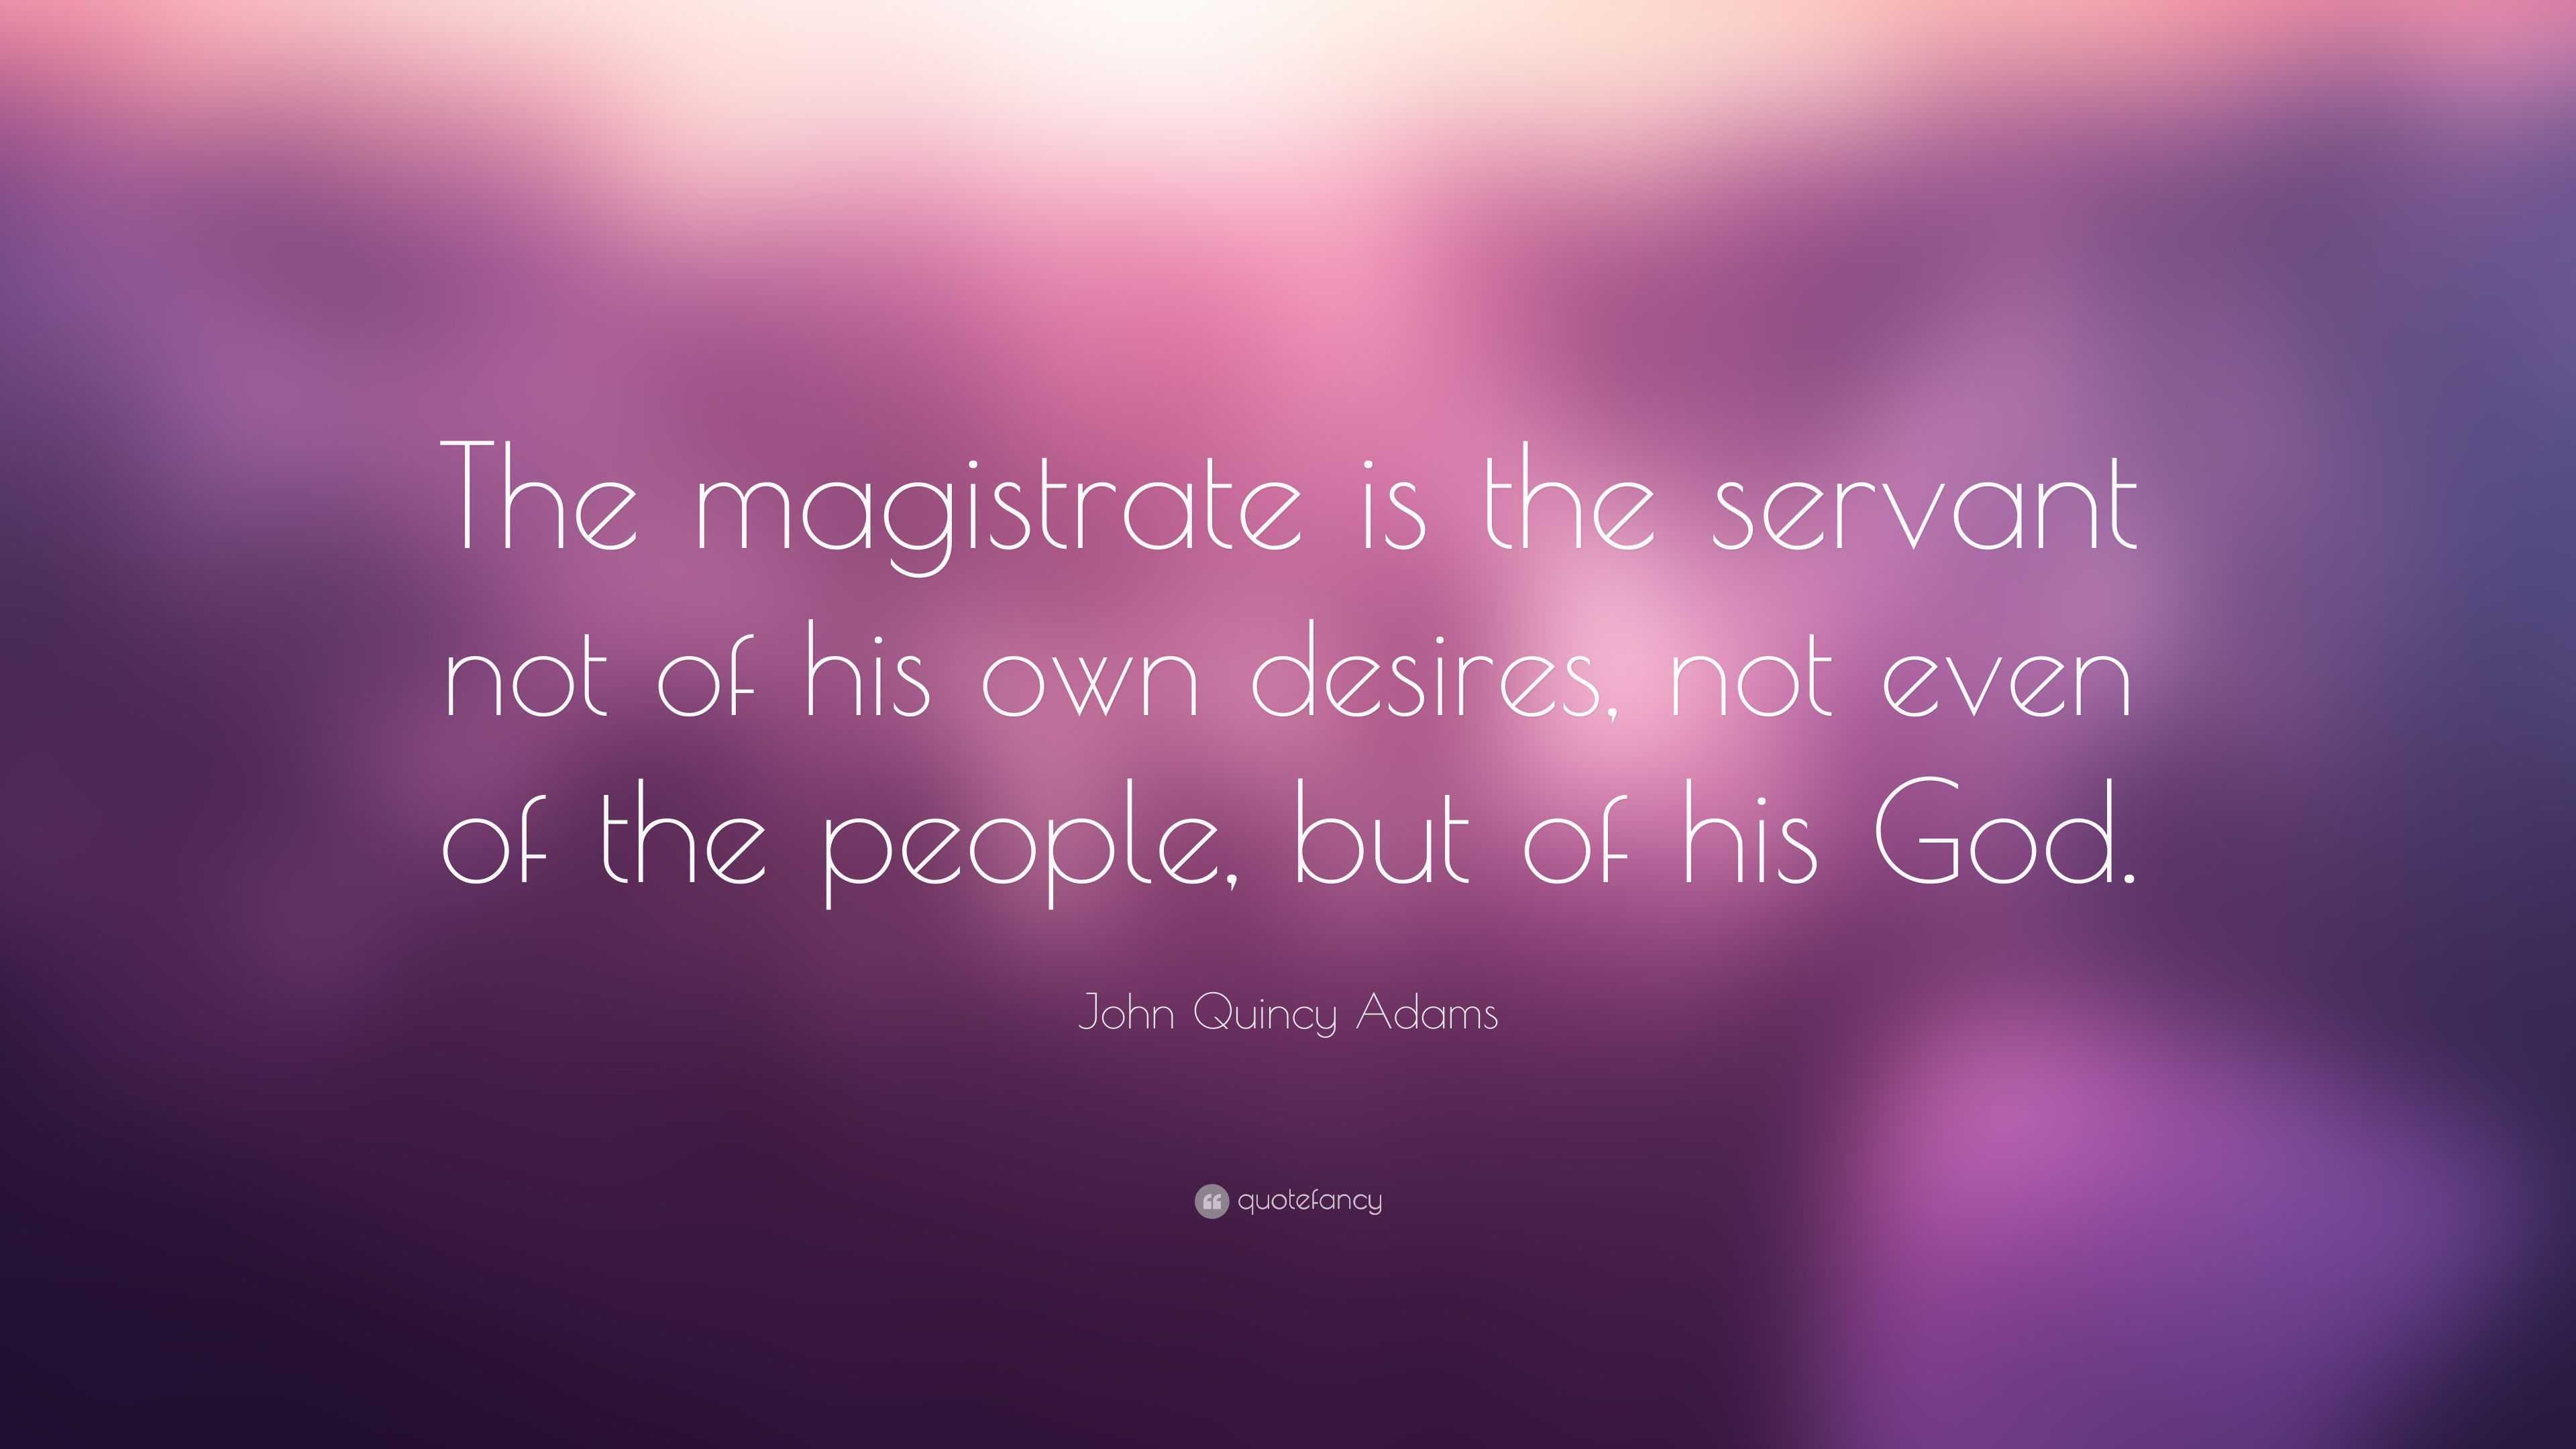 John Quincy Adams Quote: “The magistrate is the servant not of his own ...